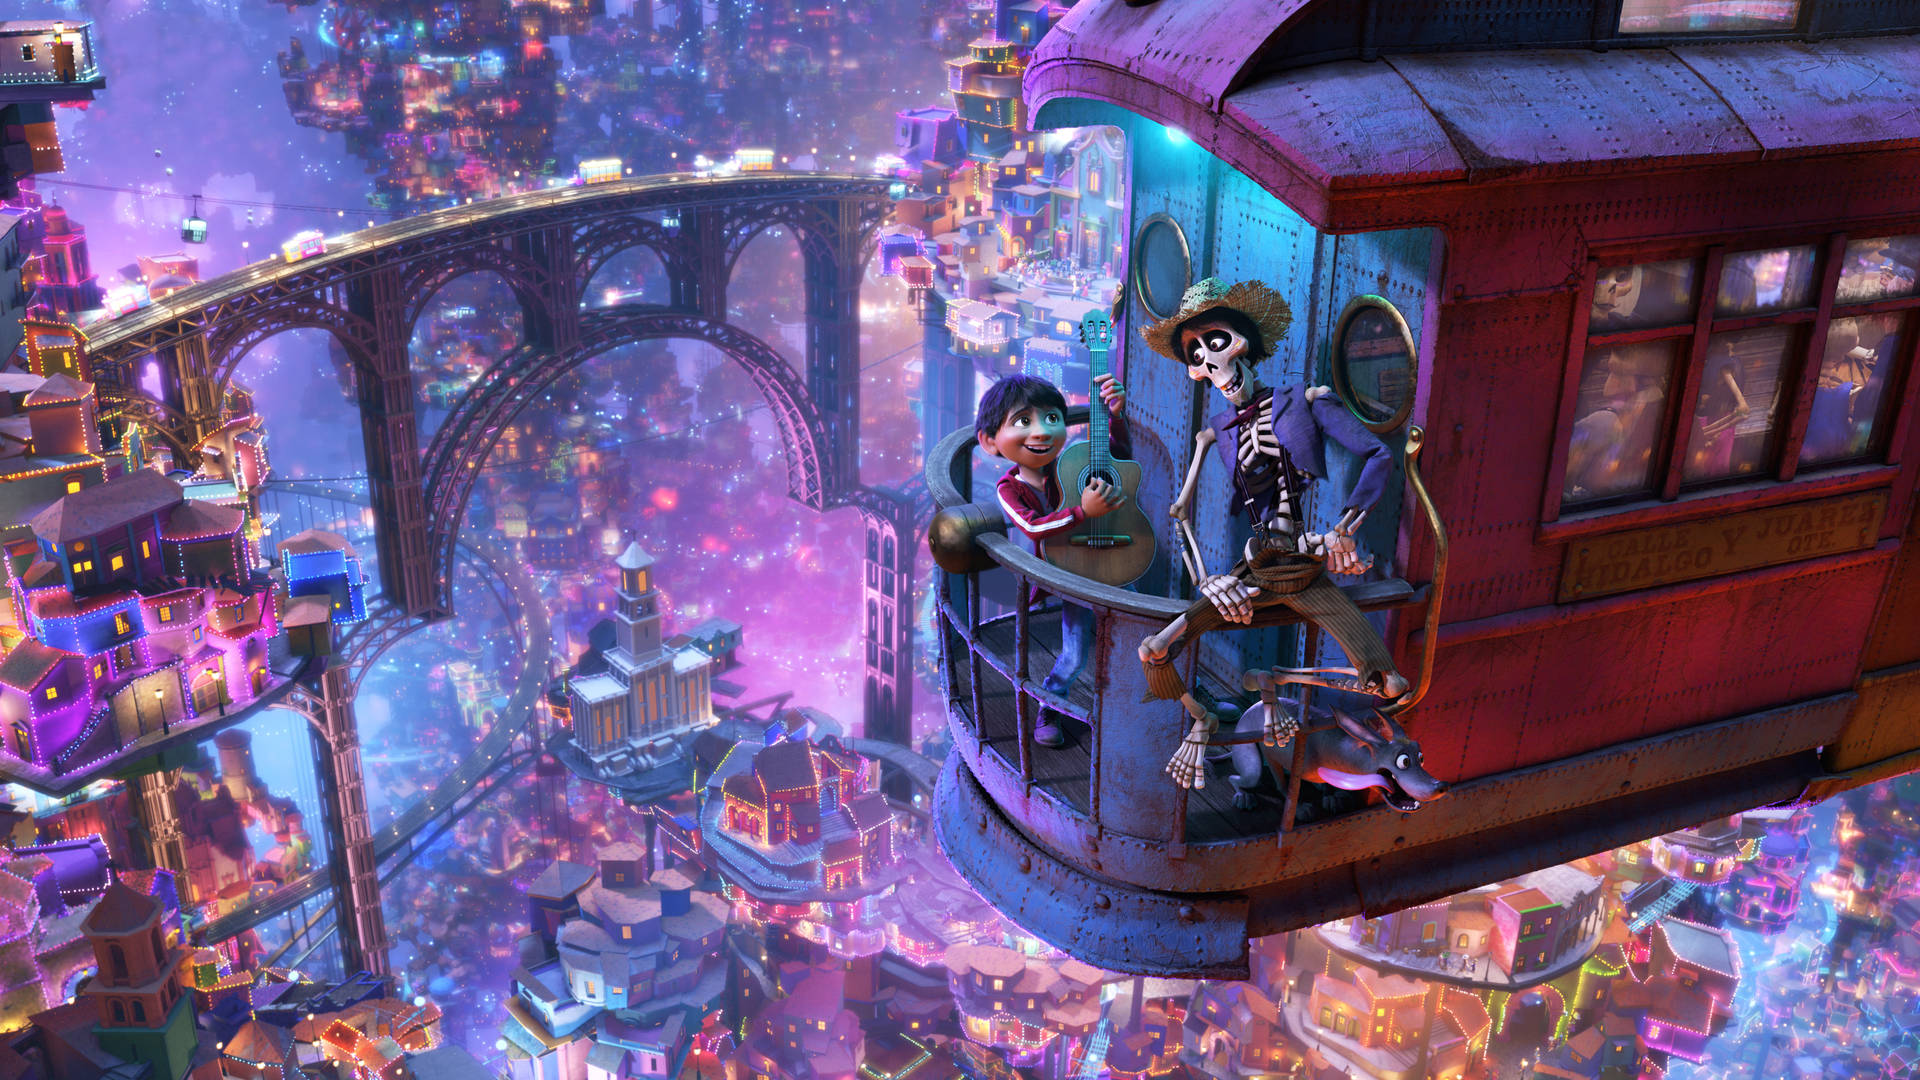 Miguel and Hector's Fun Journey on a Train in Coco Wallpaper